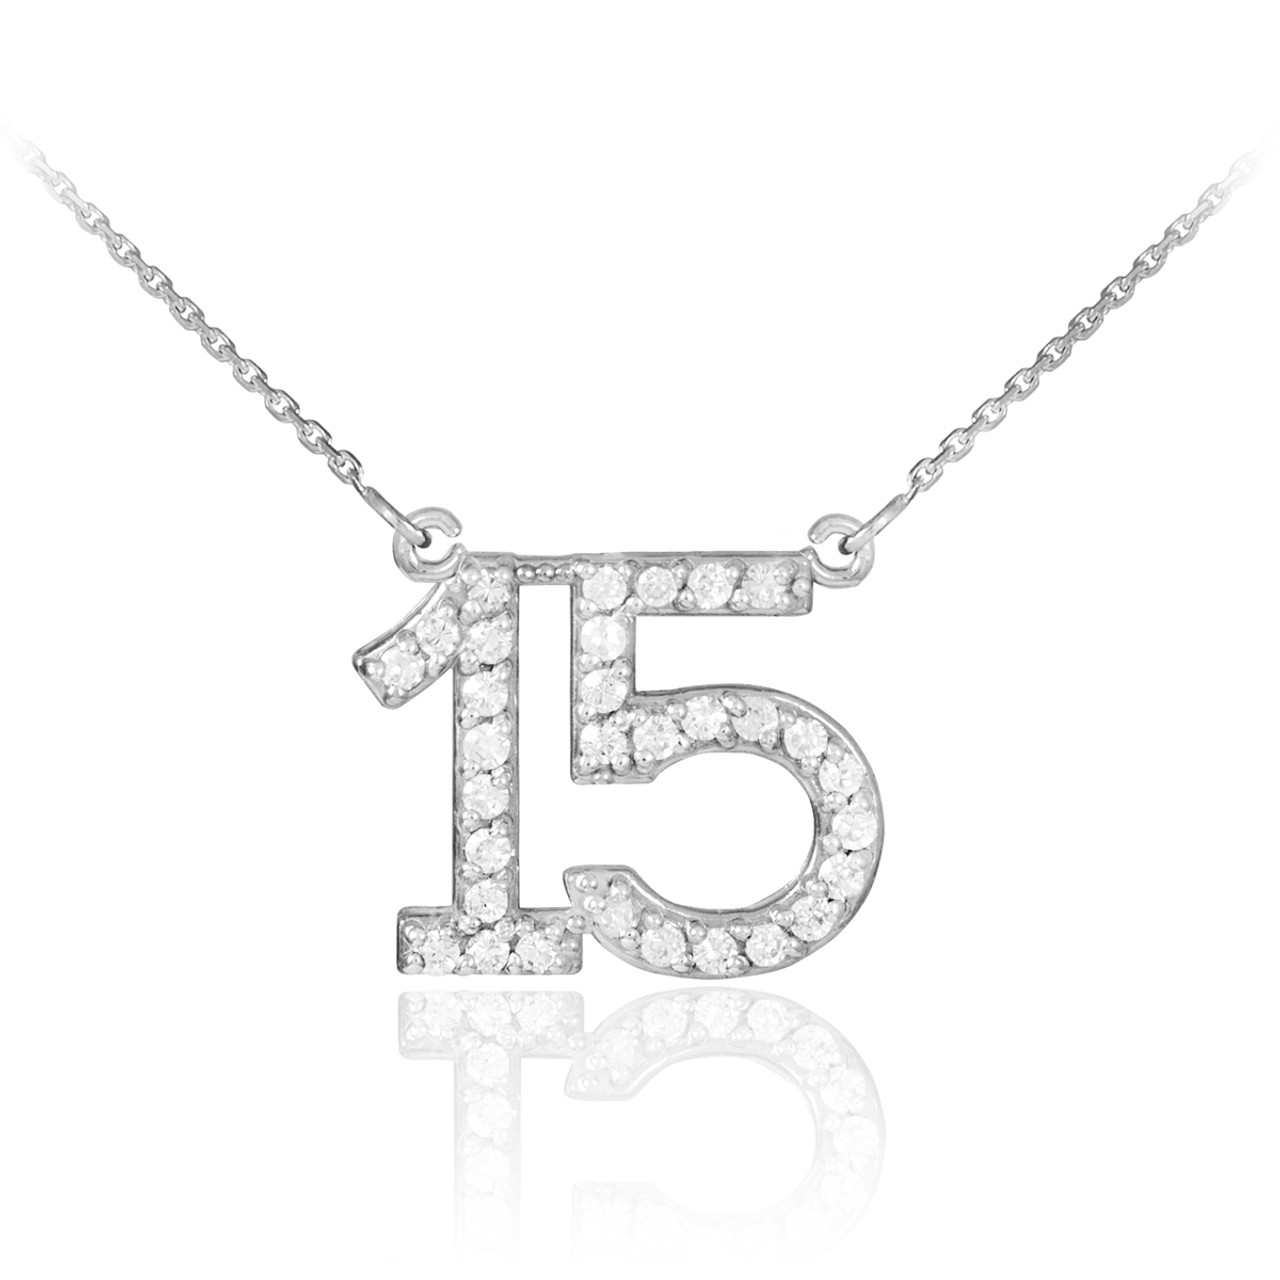 Quinceanera Necklace | White Gold Quinceanera Necklace | 15 Anos Pendant | 15  Anos Necklace | Quinceanera Diamond Necklace